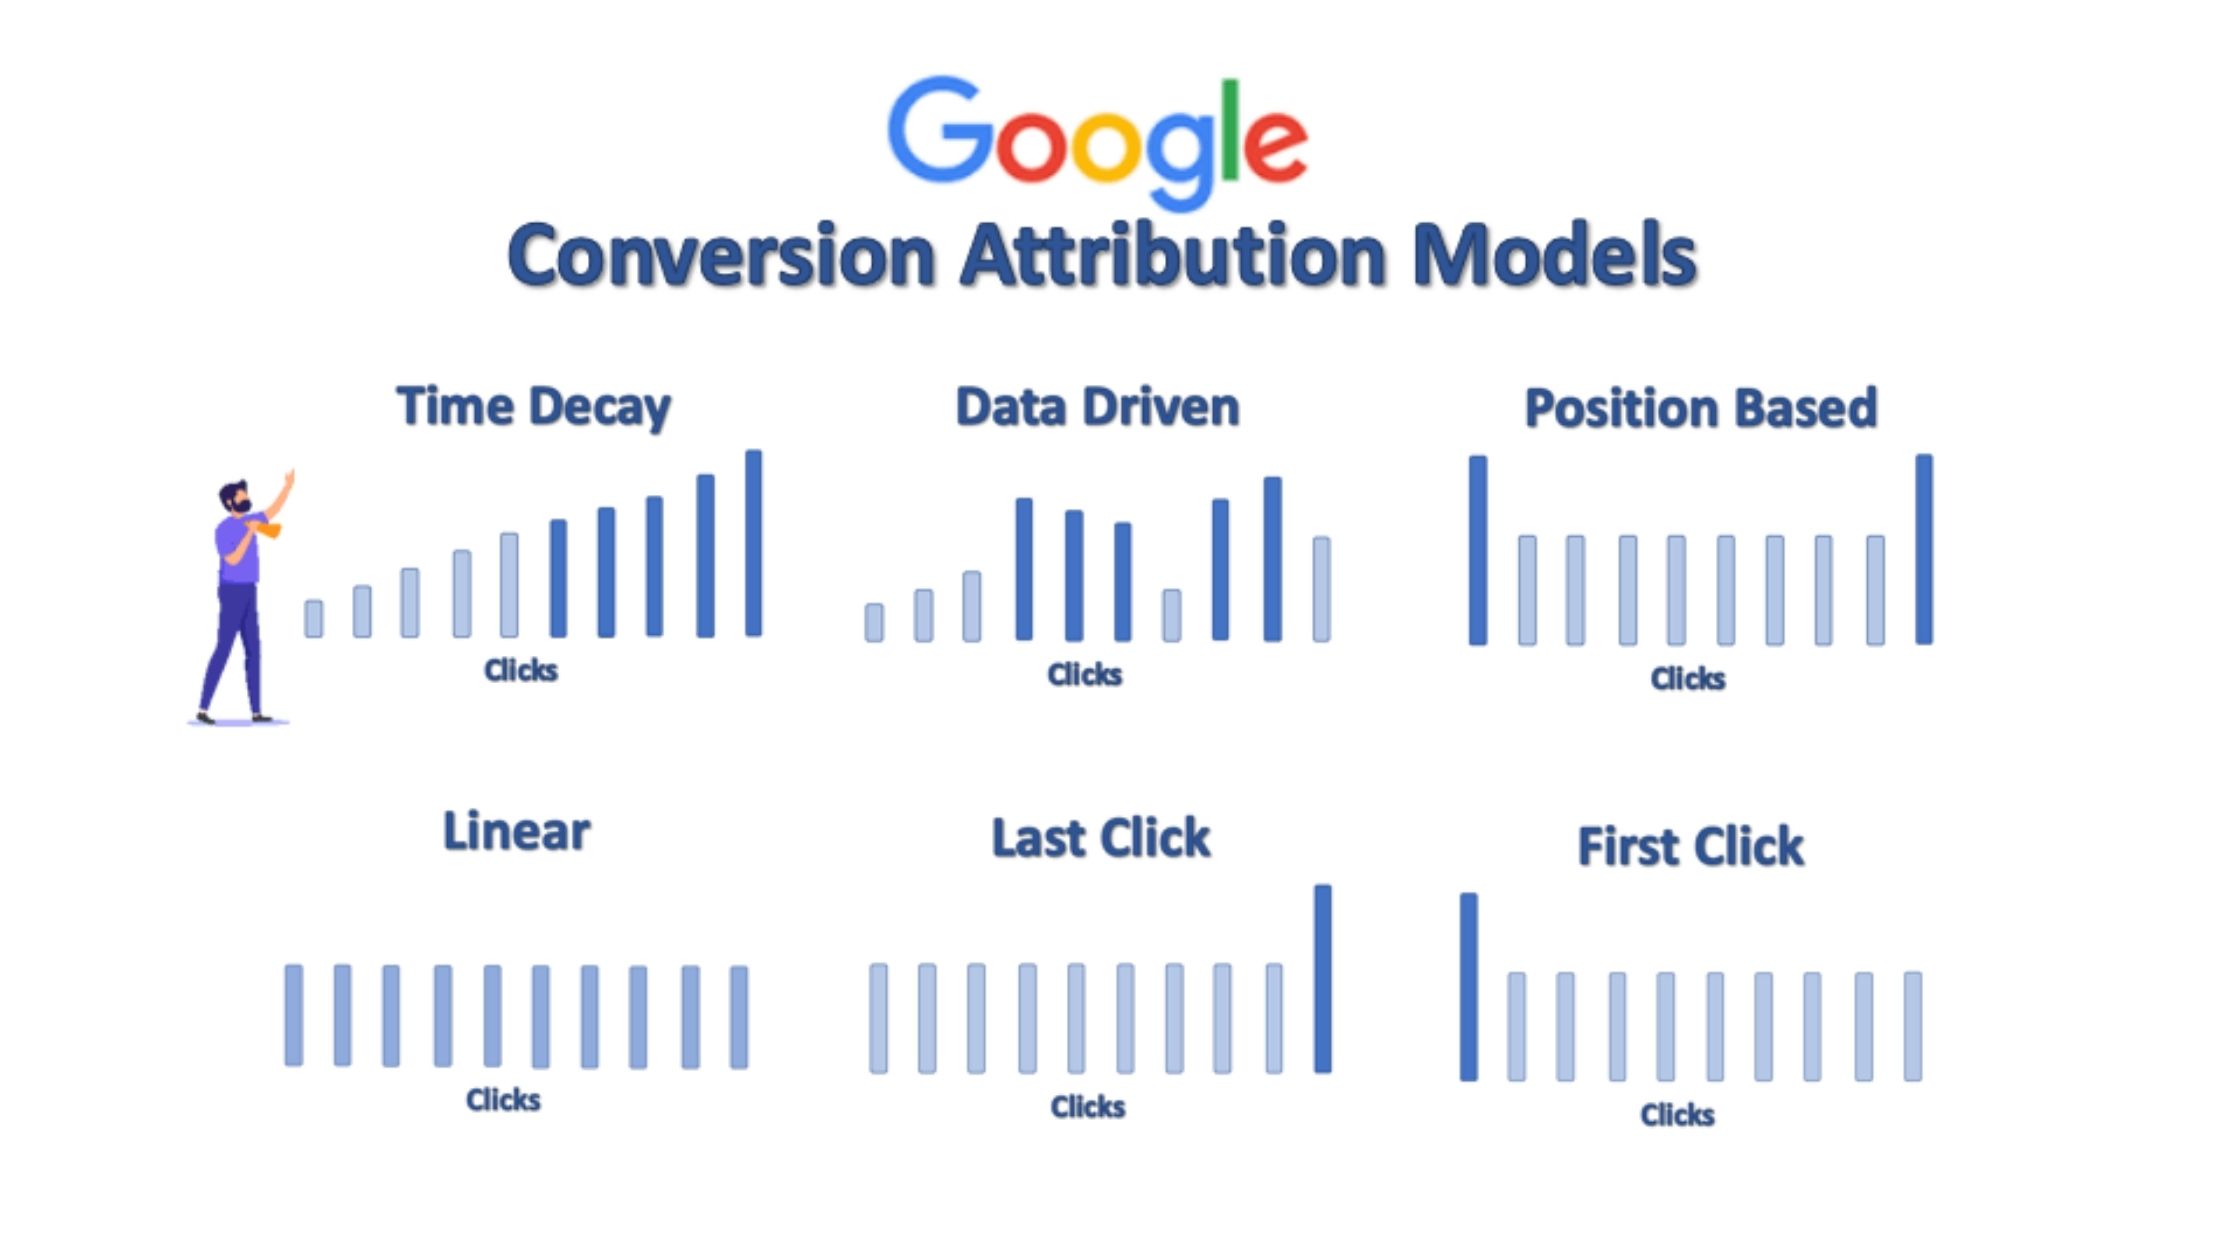 The Google Ads Conversion Attribution Models